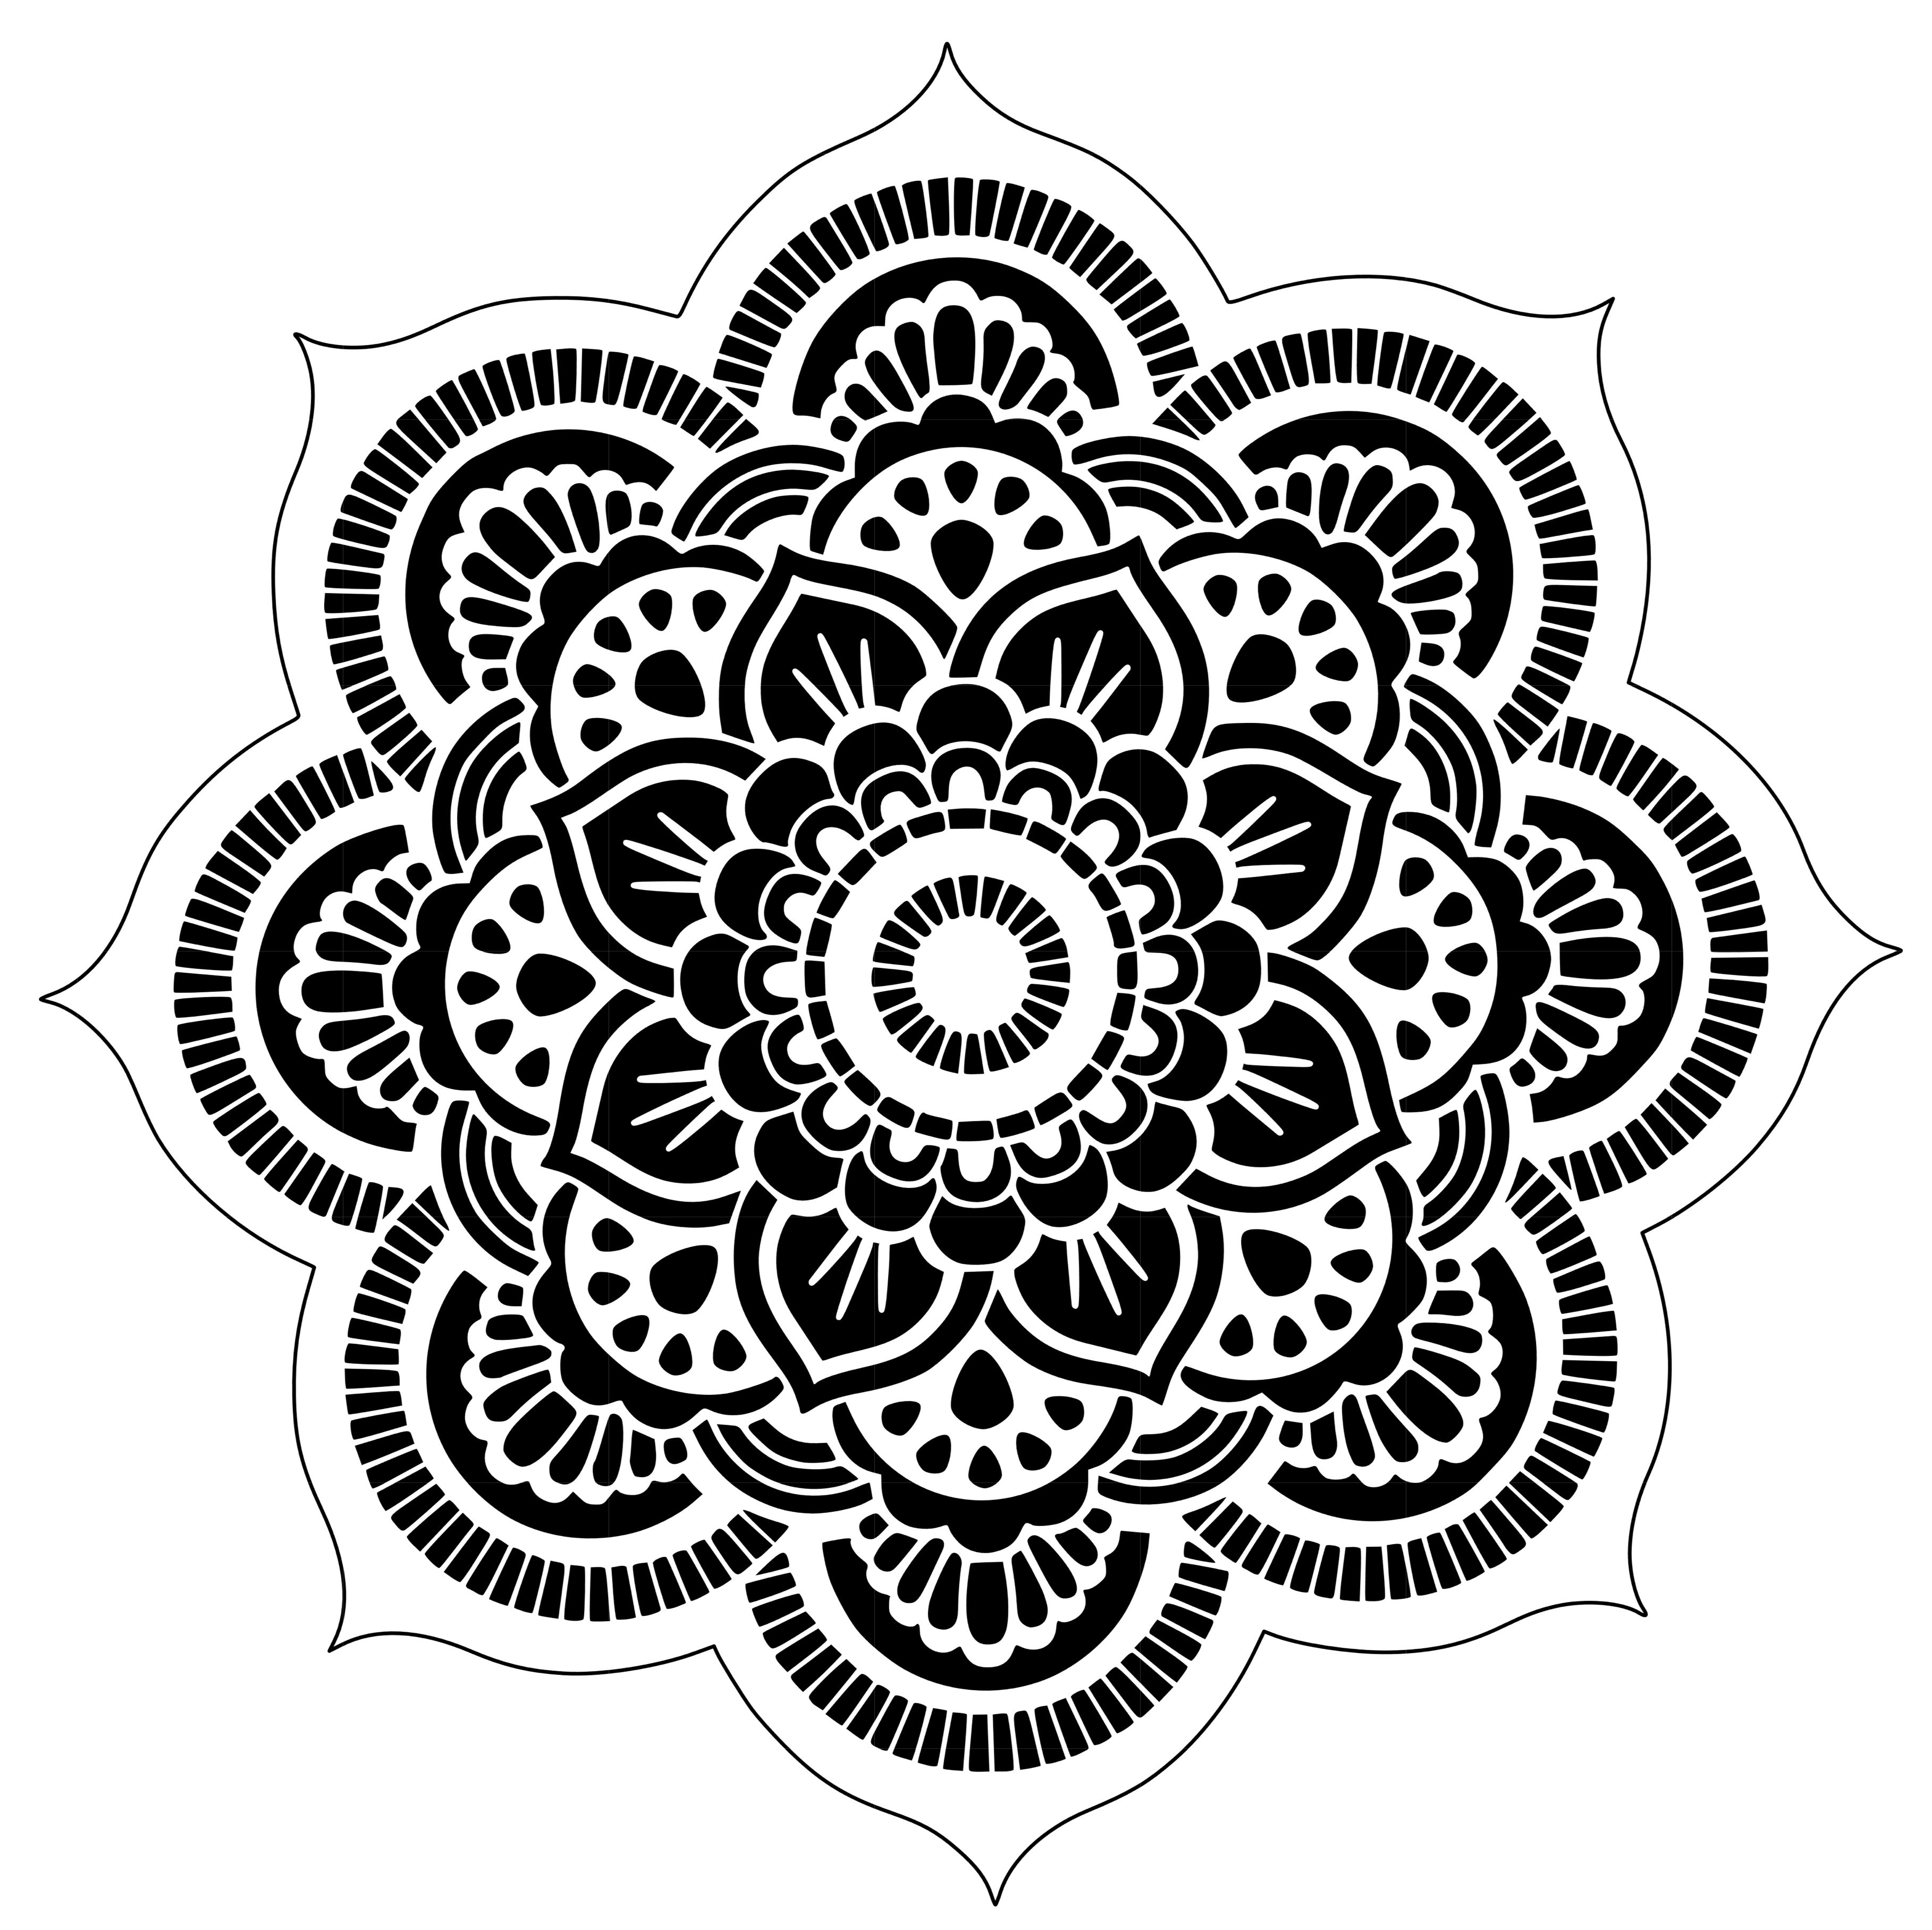 Flower Mandala Coloring Pages Best Coloring Pages For Kids